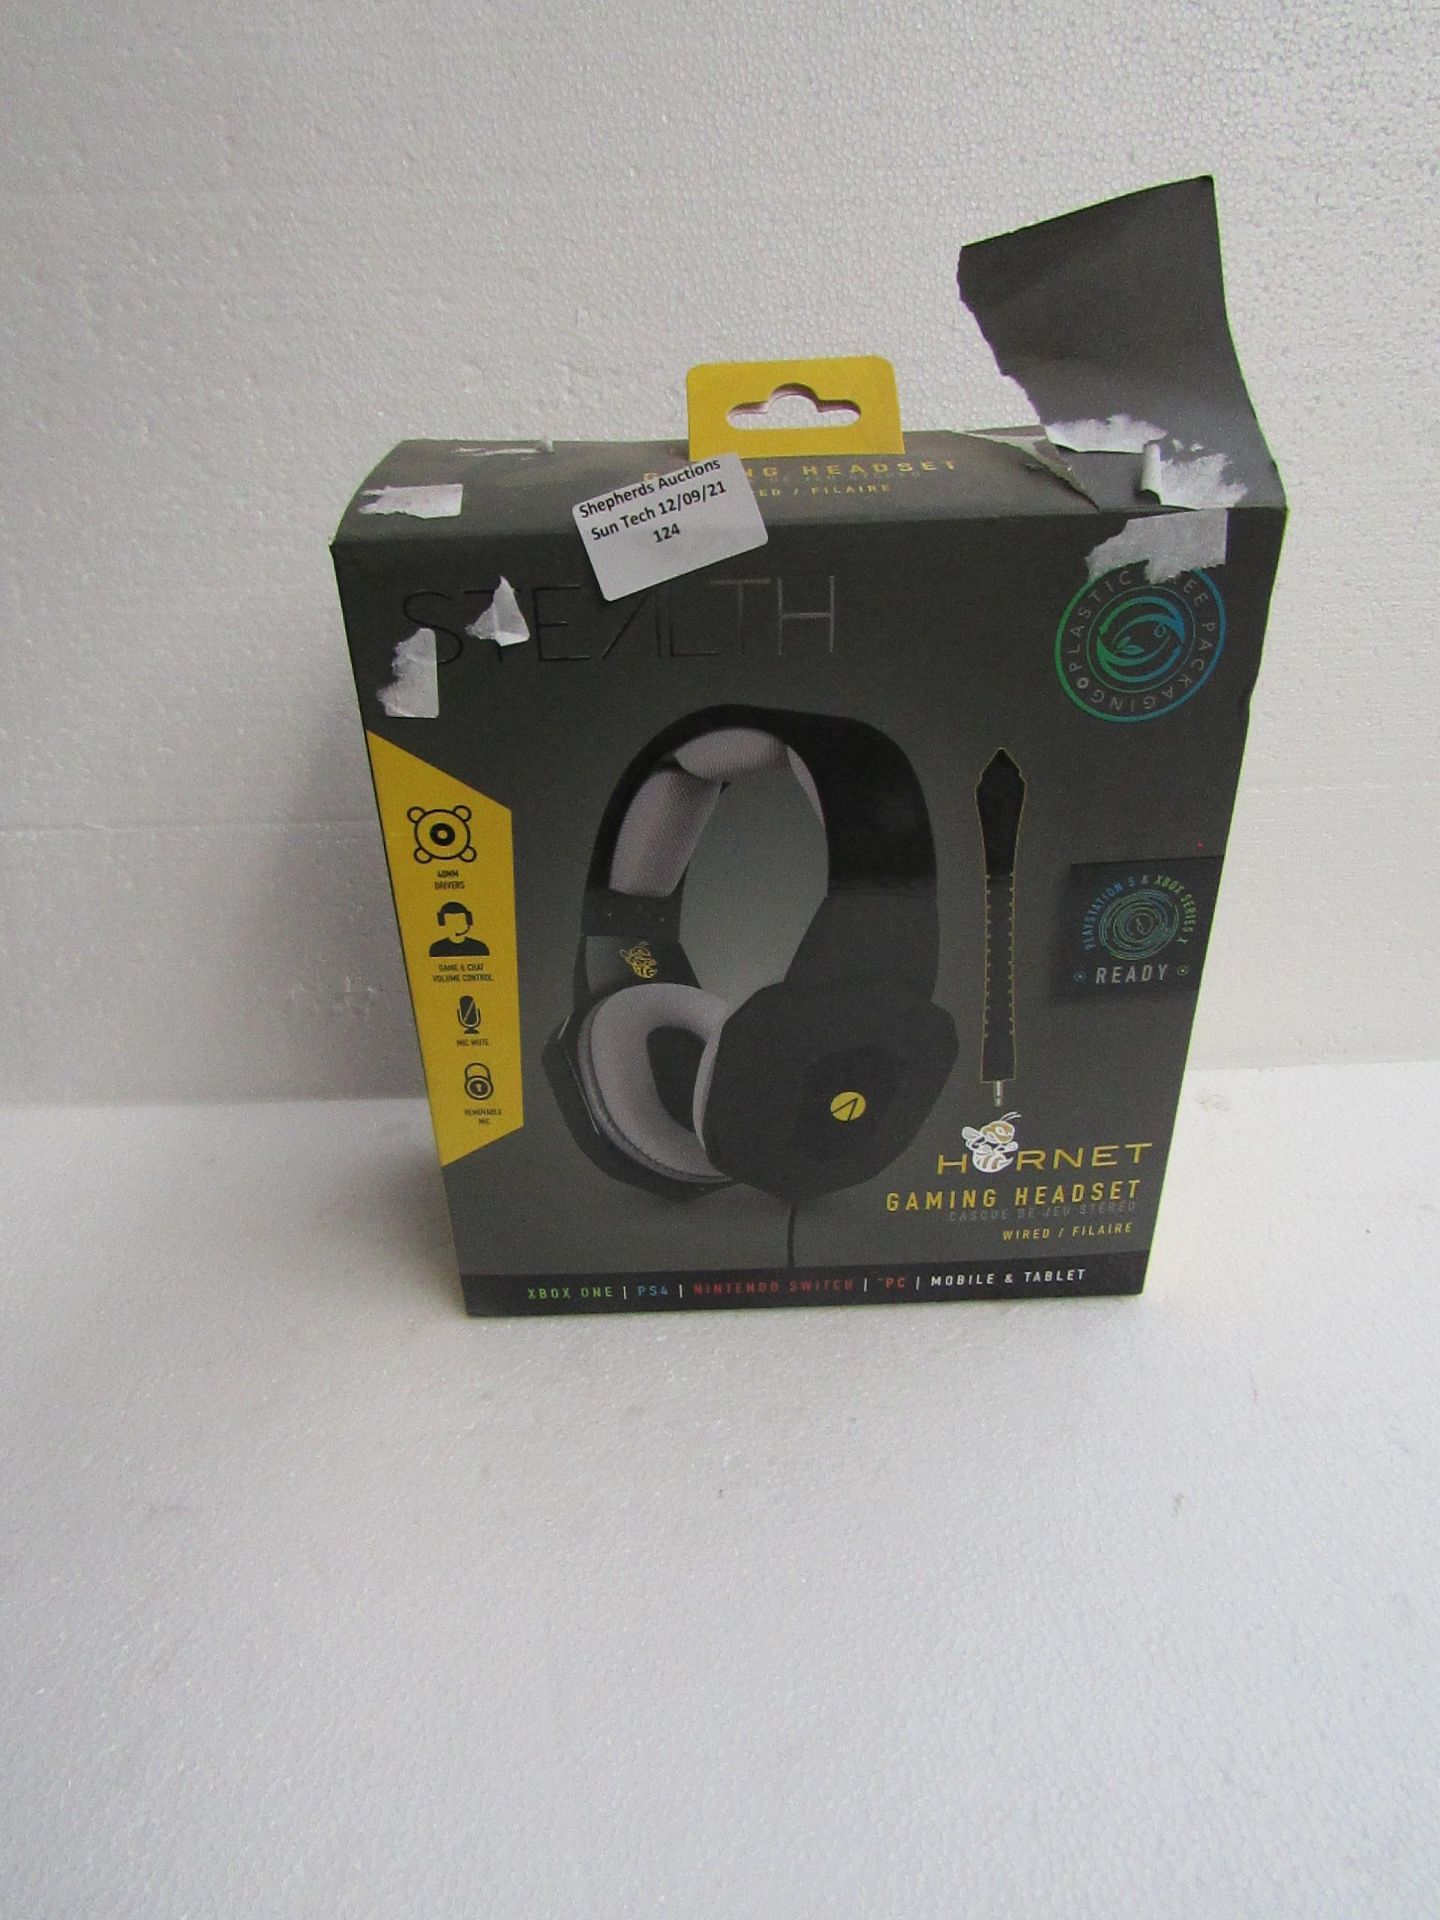 Hornet Gaming Headset - Unchecked & Boxed - RRP £25